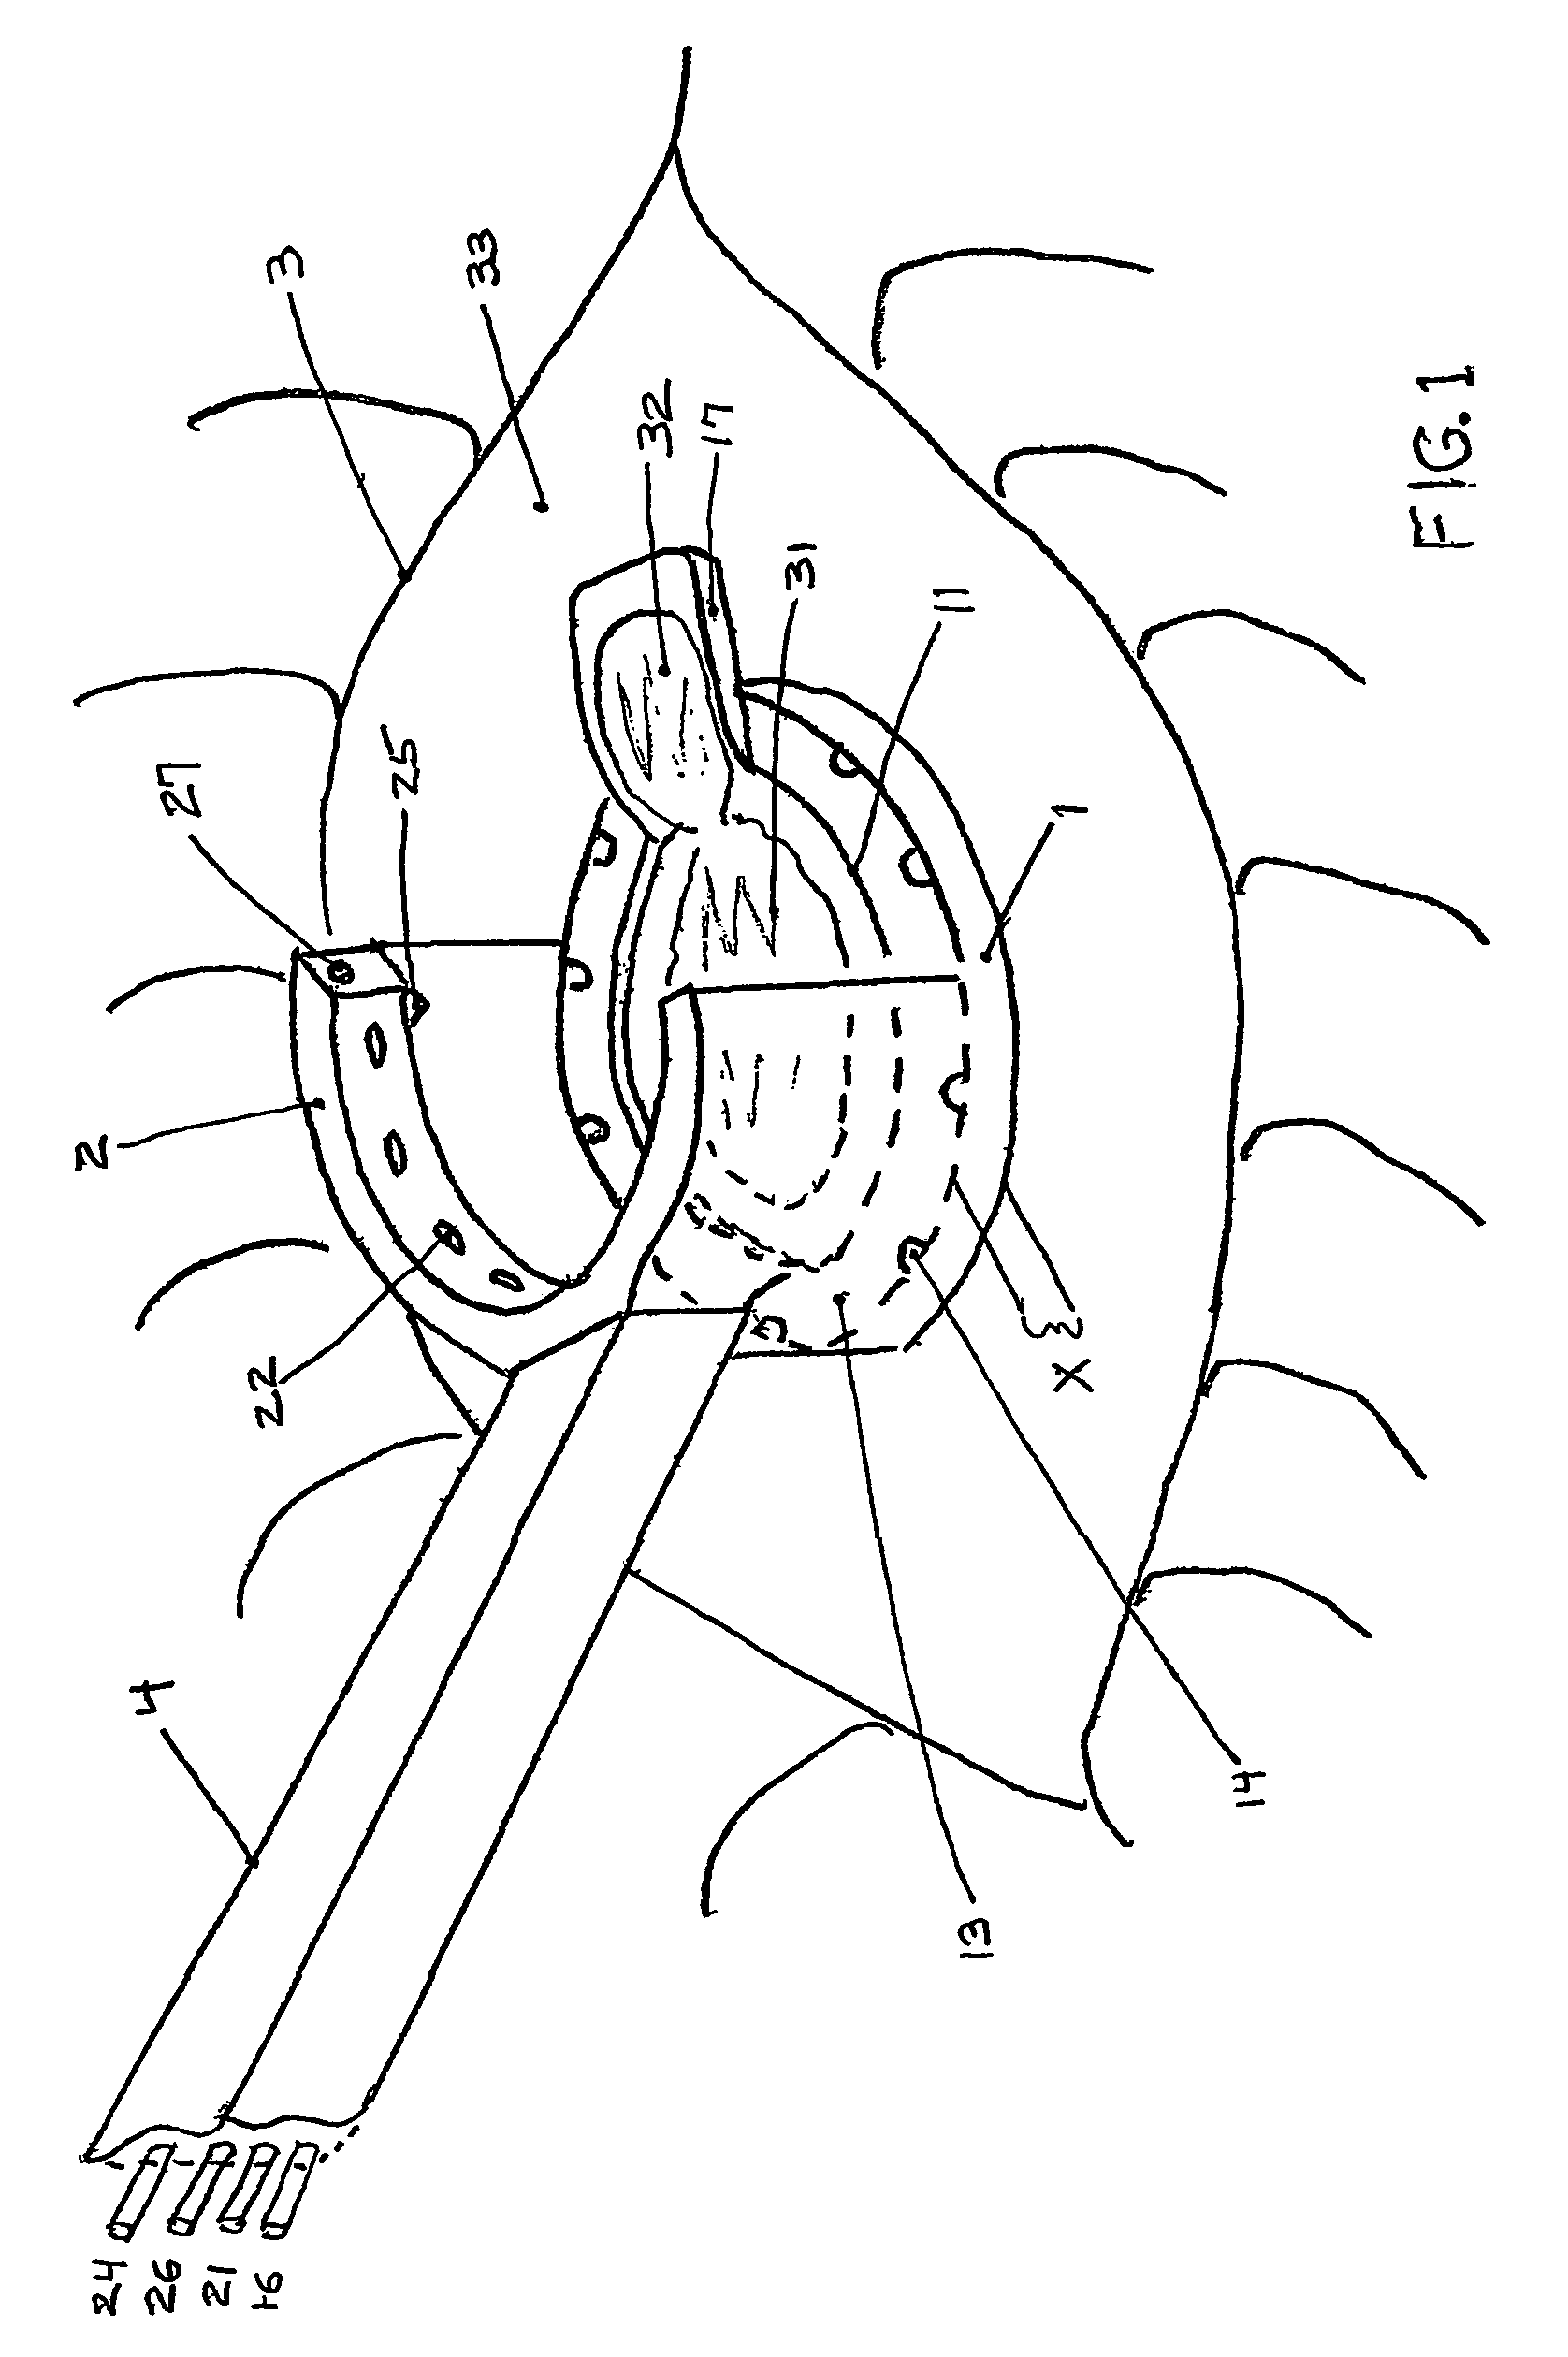 Multi-function surgical instrument for facilitating ophthalmic laser surgery